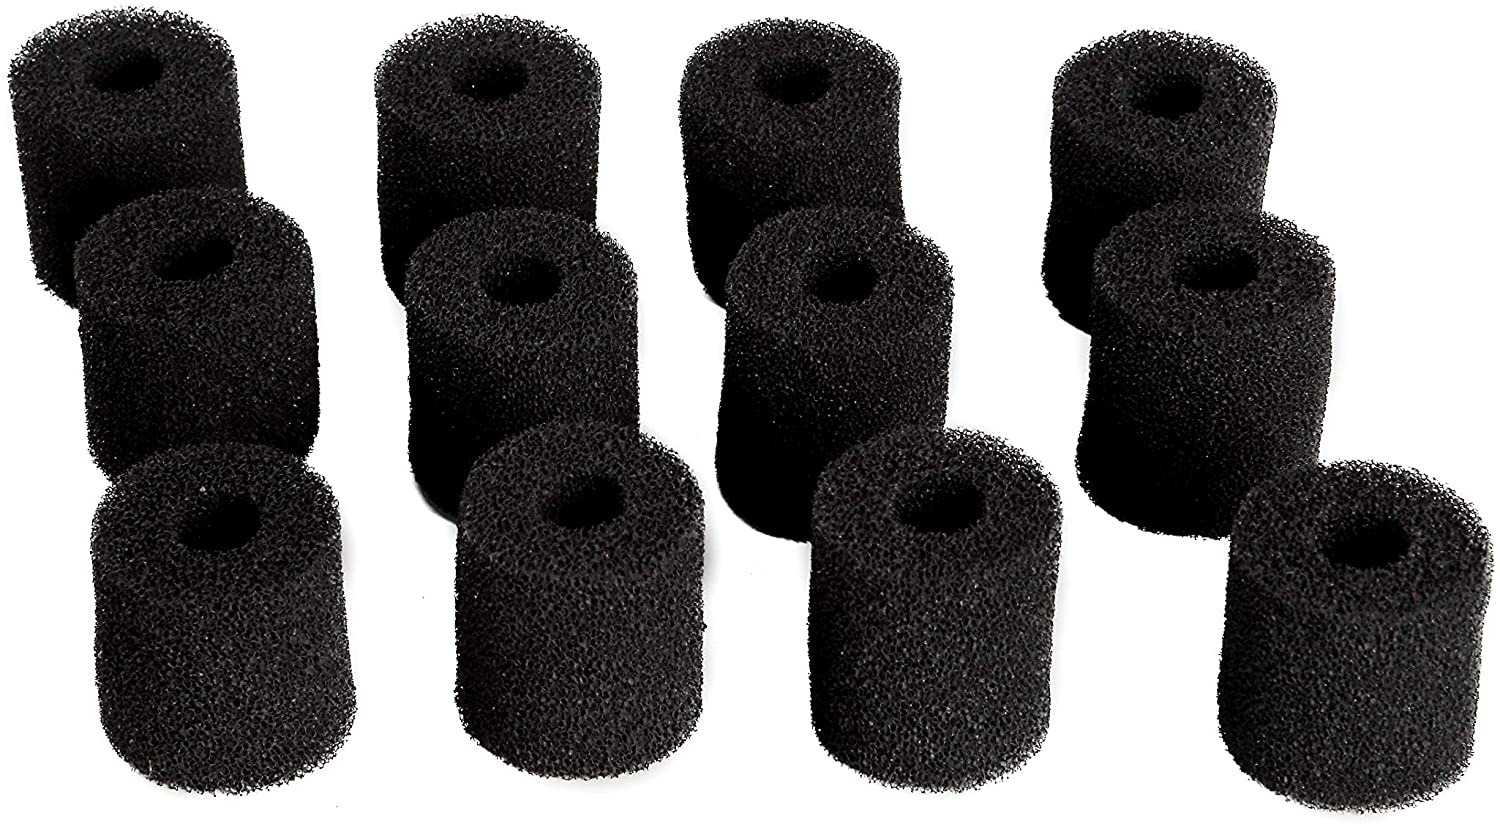 LTWHOME Carbon Foam Filter Pads fit for 2628080 Aquaball 2208 2210 2212/60 130 180,Biopower 160 200 240 (Pack of 12)